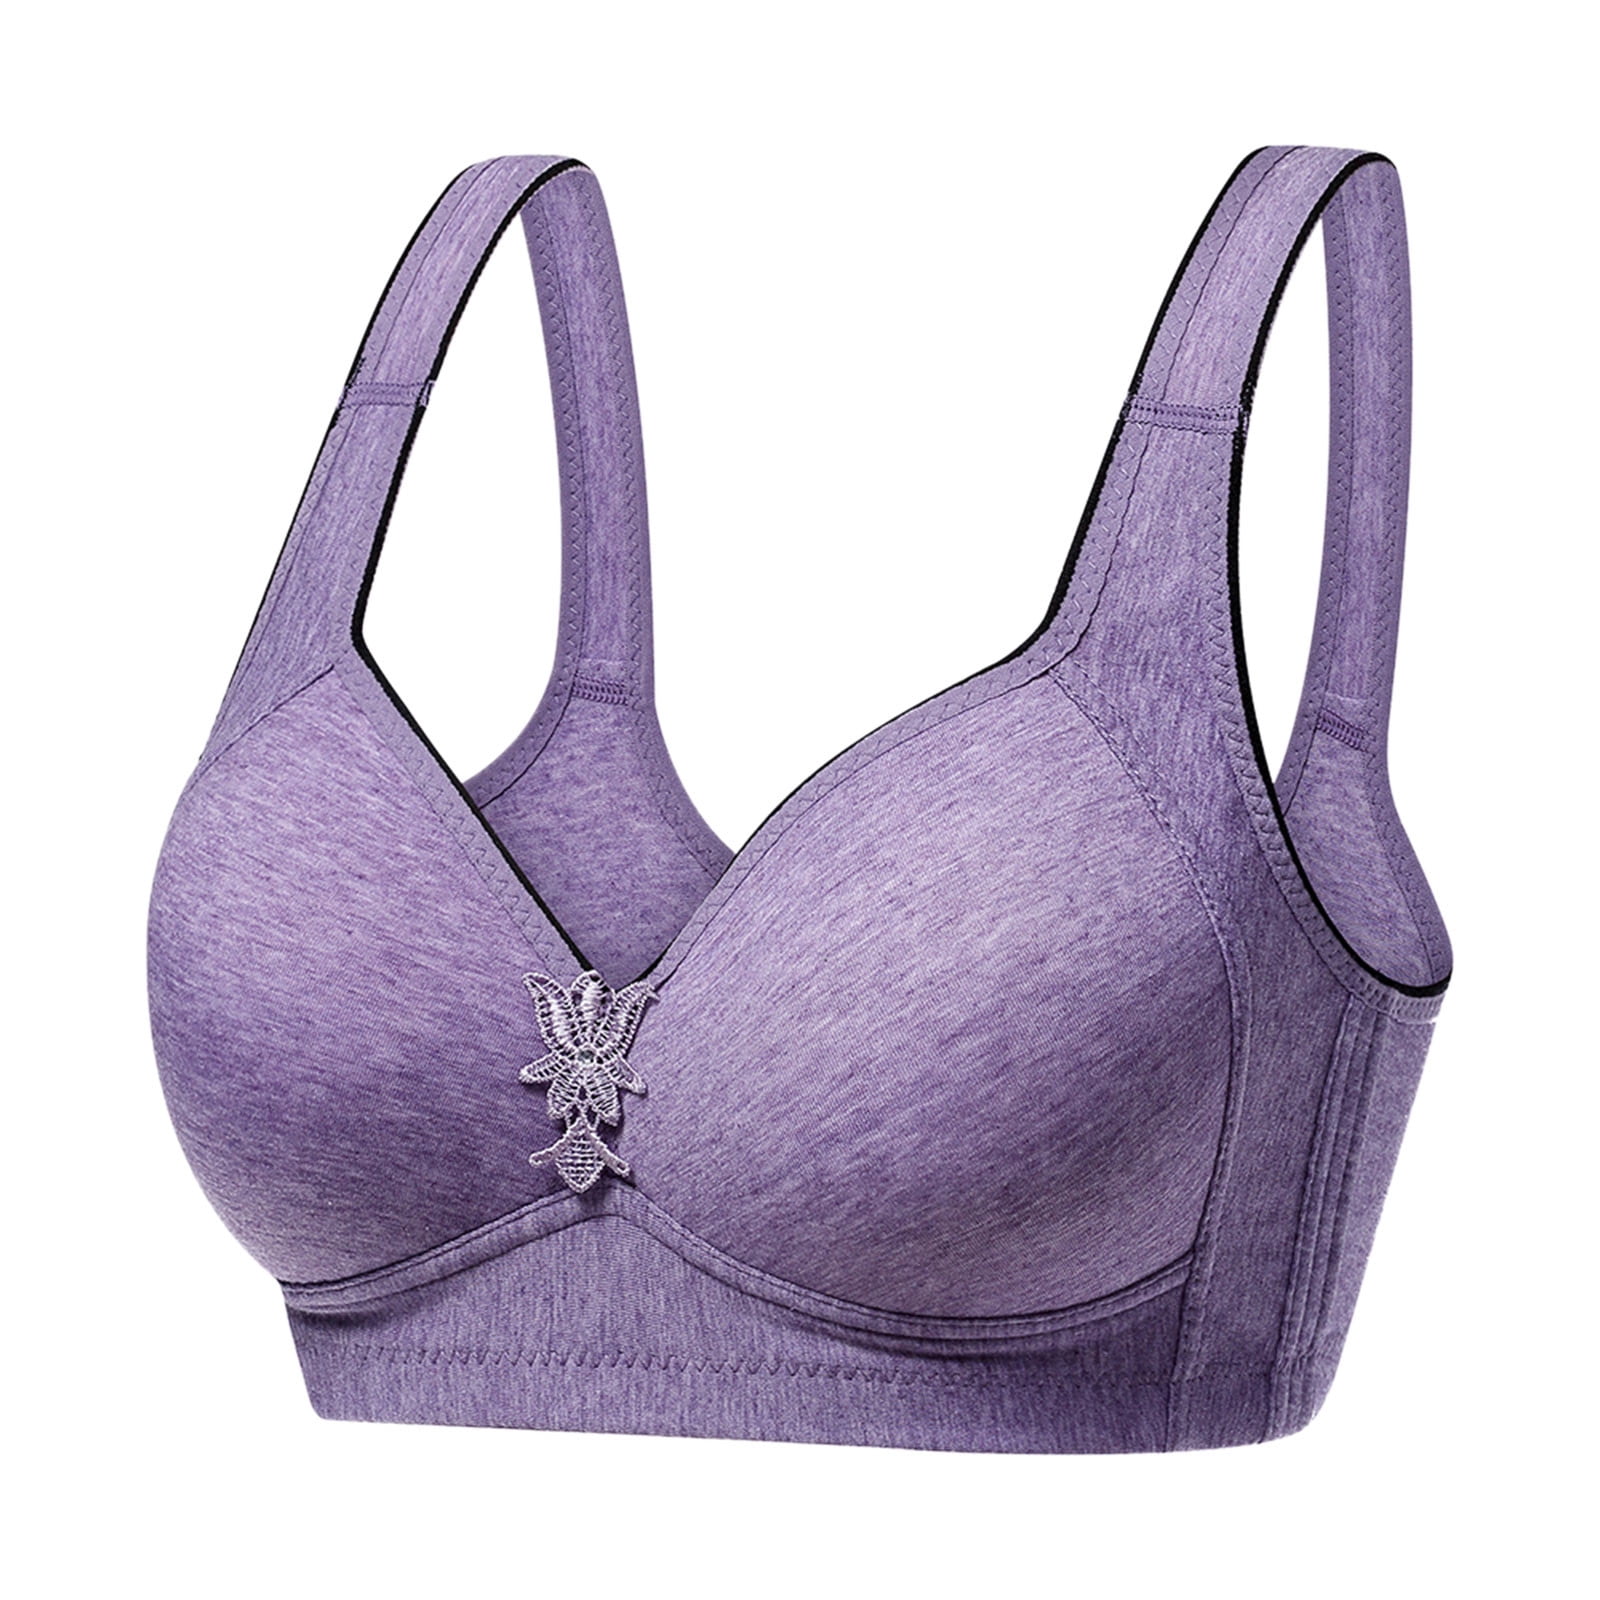 Women's Basic Bra,Women's Push up Bra with Padded Removable Sexy